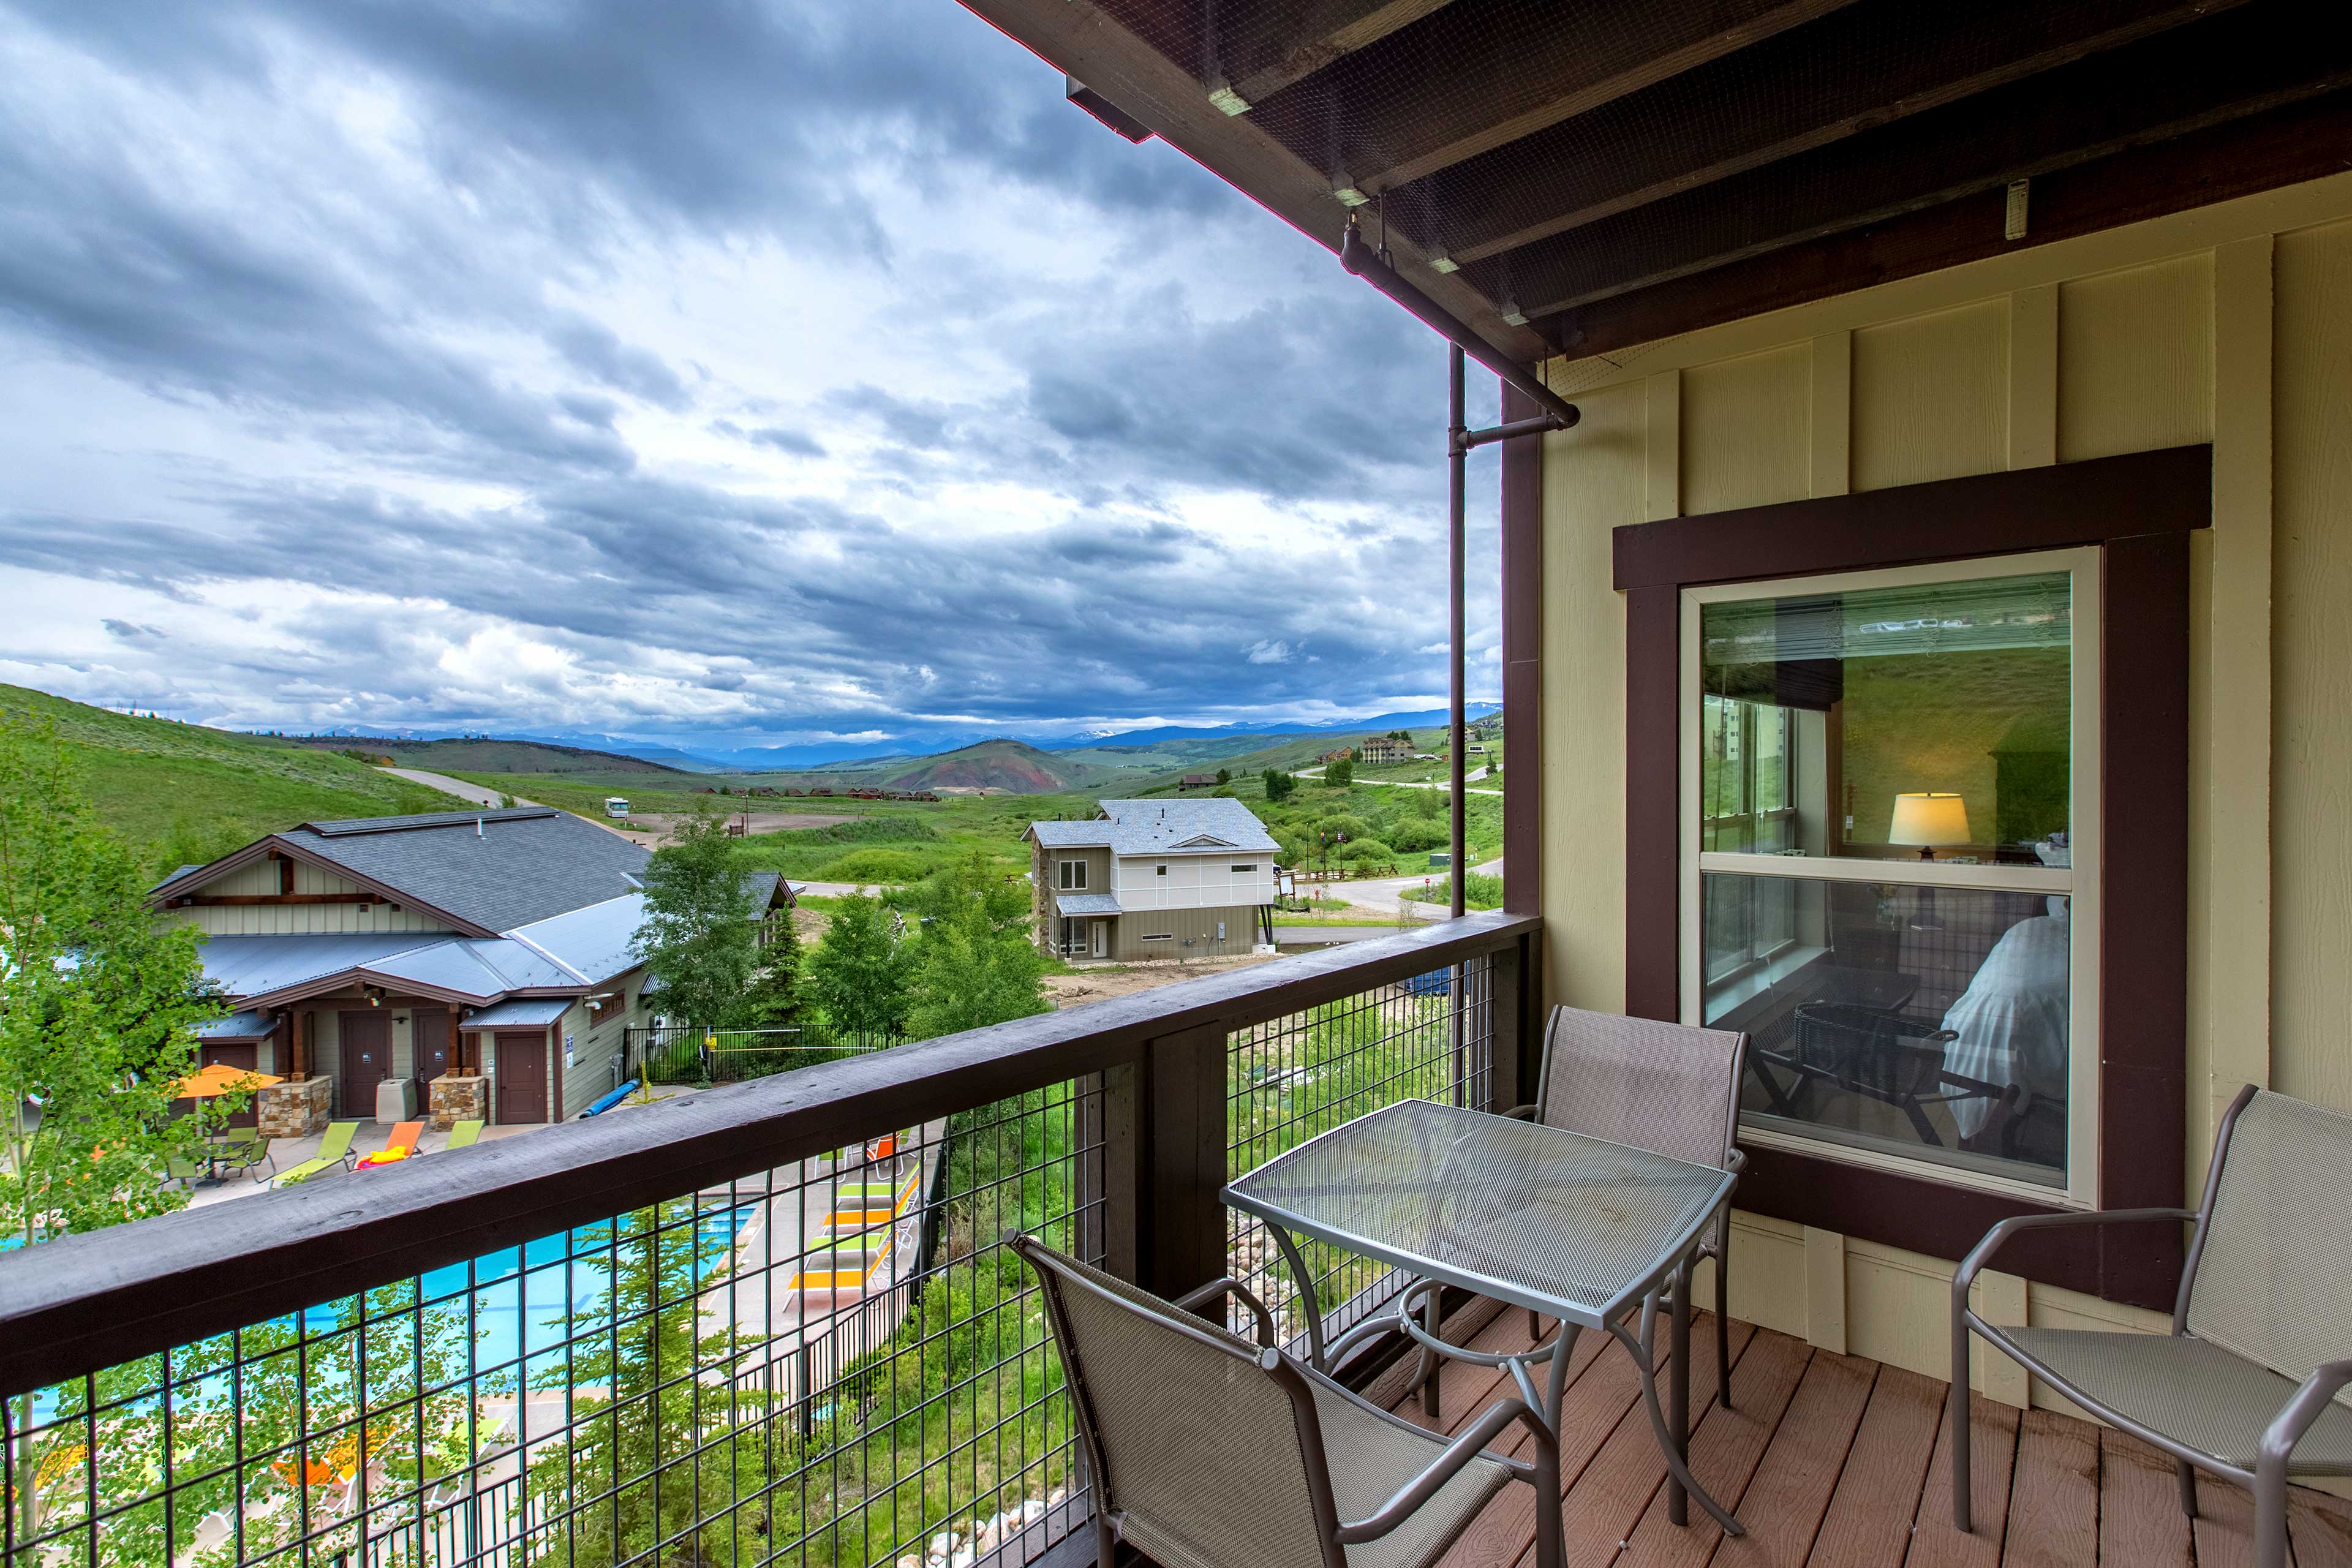 Sip morning coffee on the balcony and take in the Rocky Mountain views.